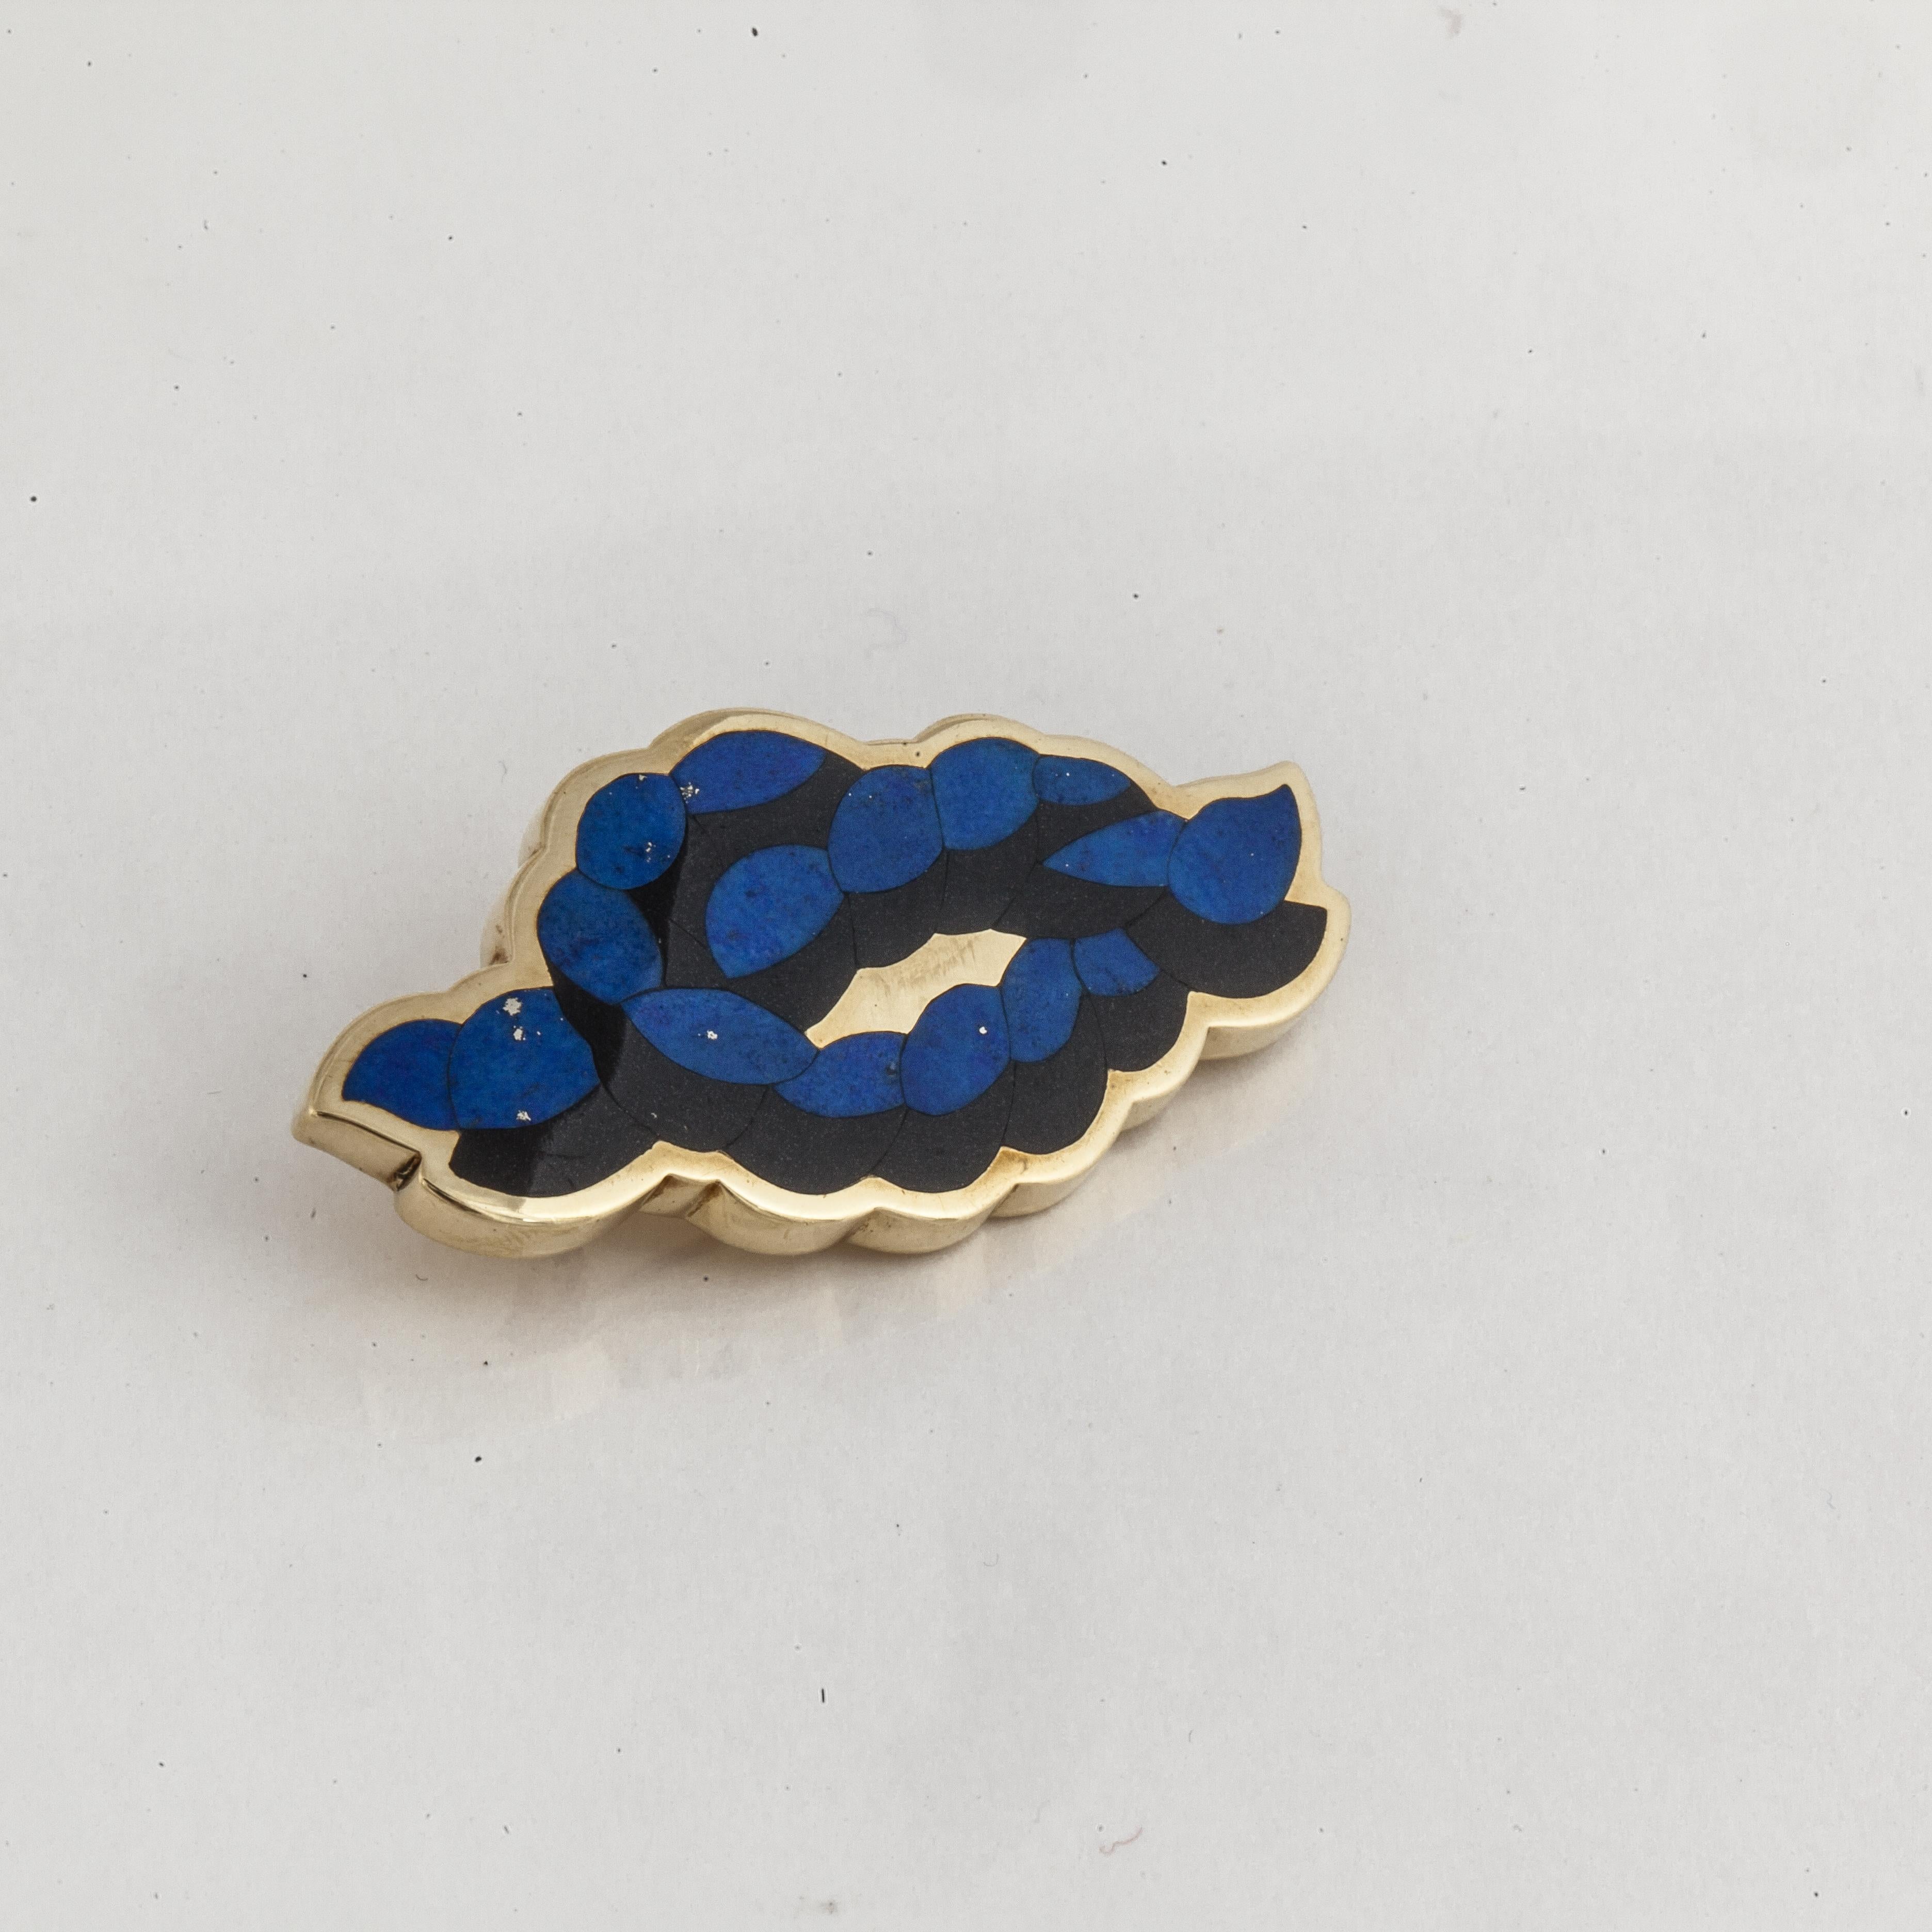 18K yellow gold pin by Angela Cummings for Tiffany & Co.  It is a knotted rope design with inlaid onyx and lapis.  Measures 1-7/8